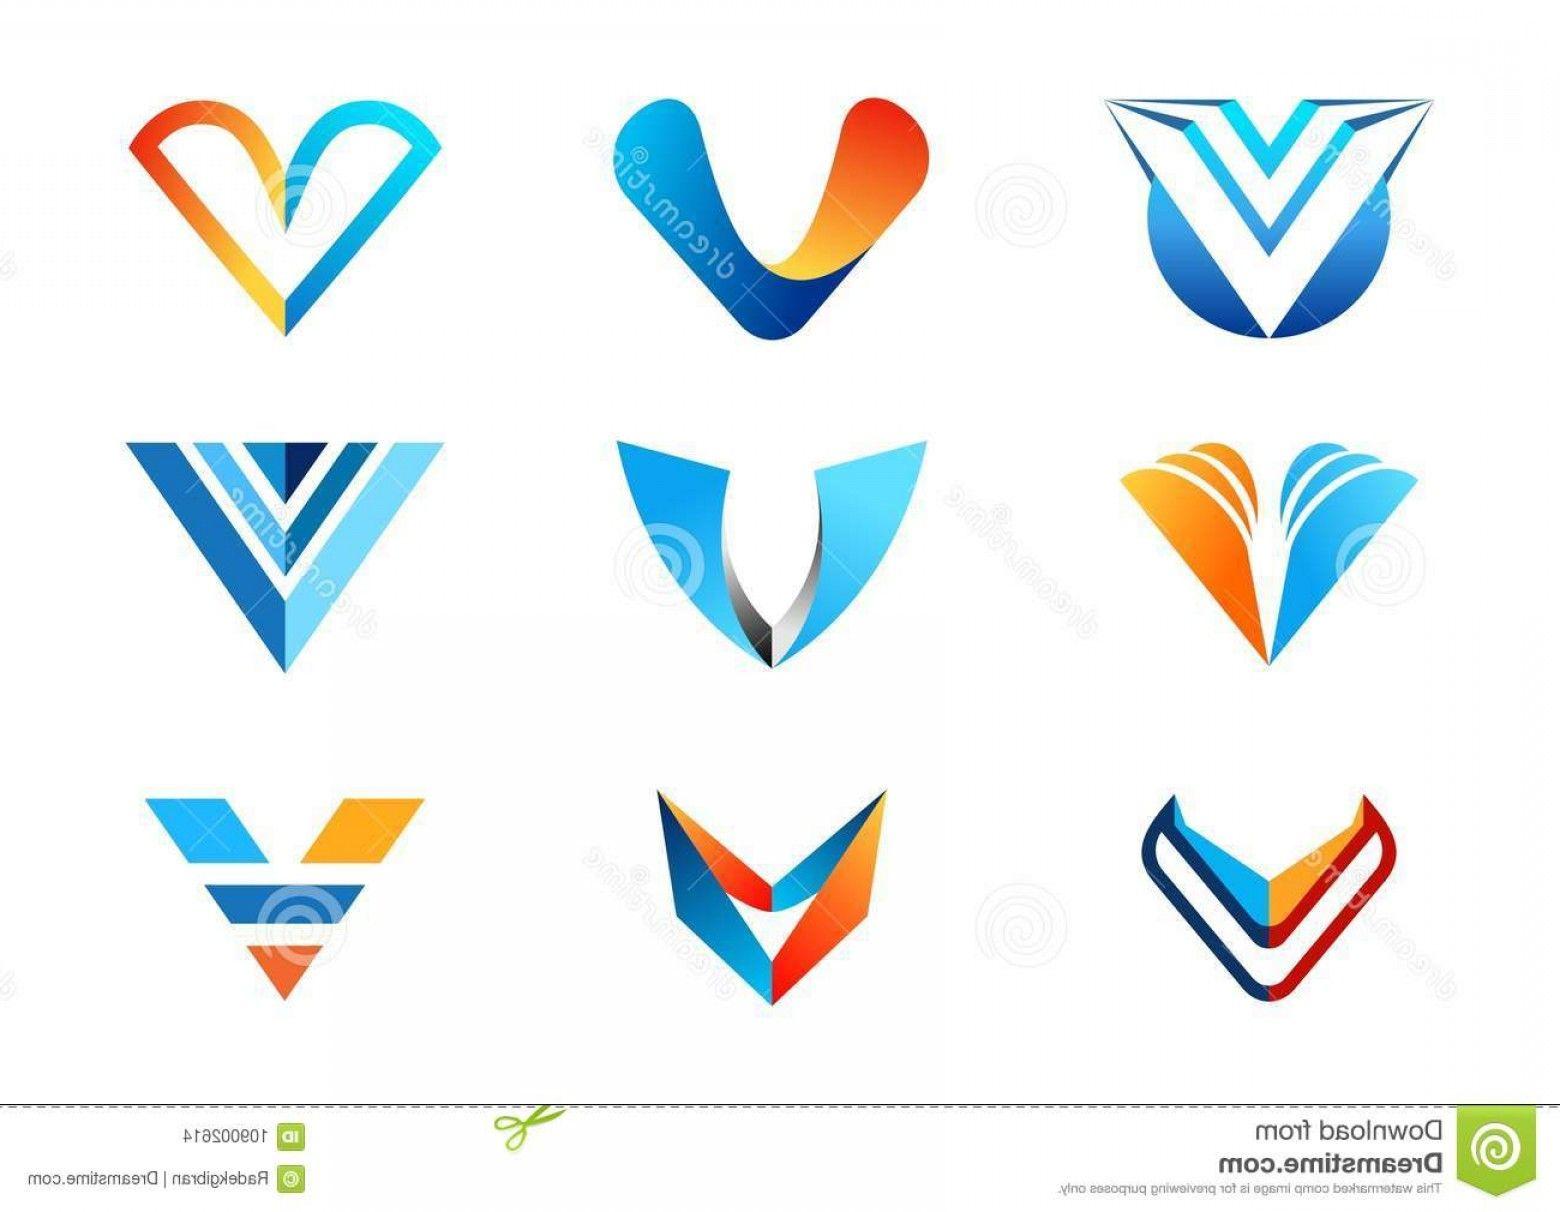 Orange and Blue Company Logo - Letter V Logo Abstract Elements Concept Company Logos Collection Set ...